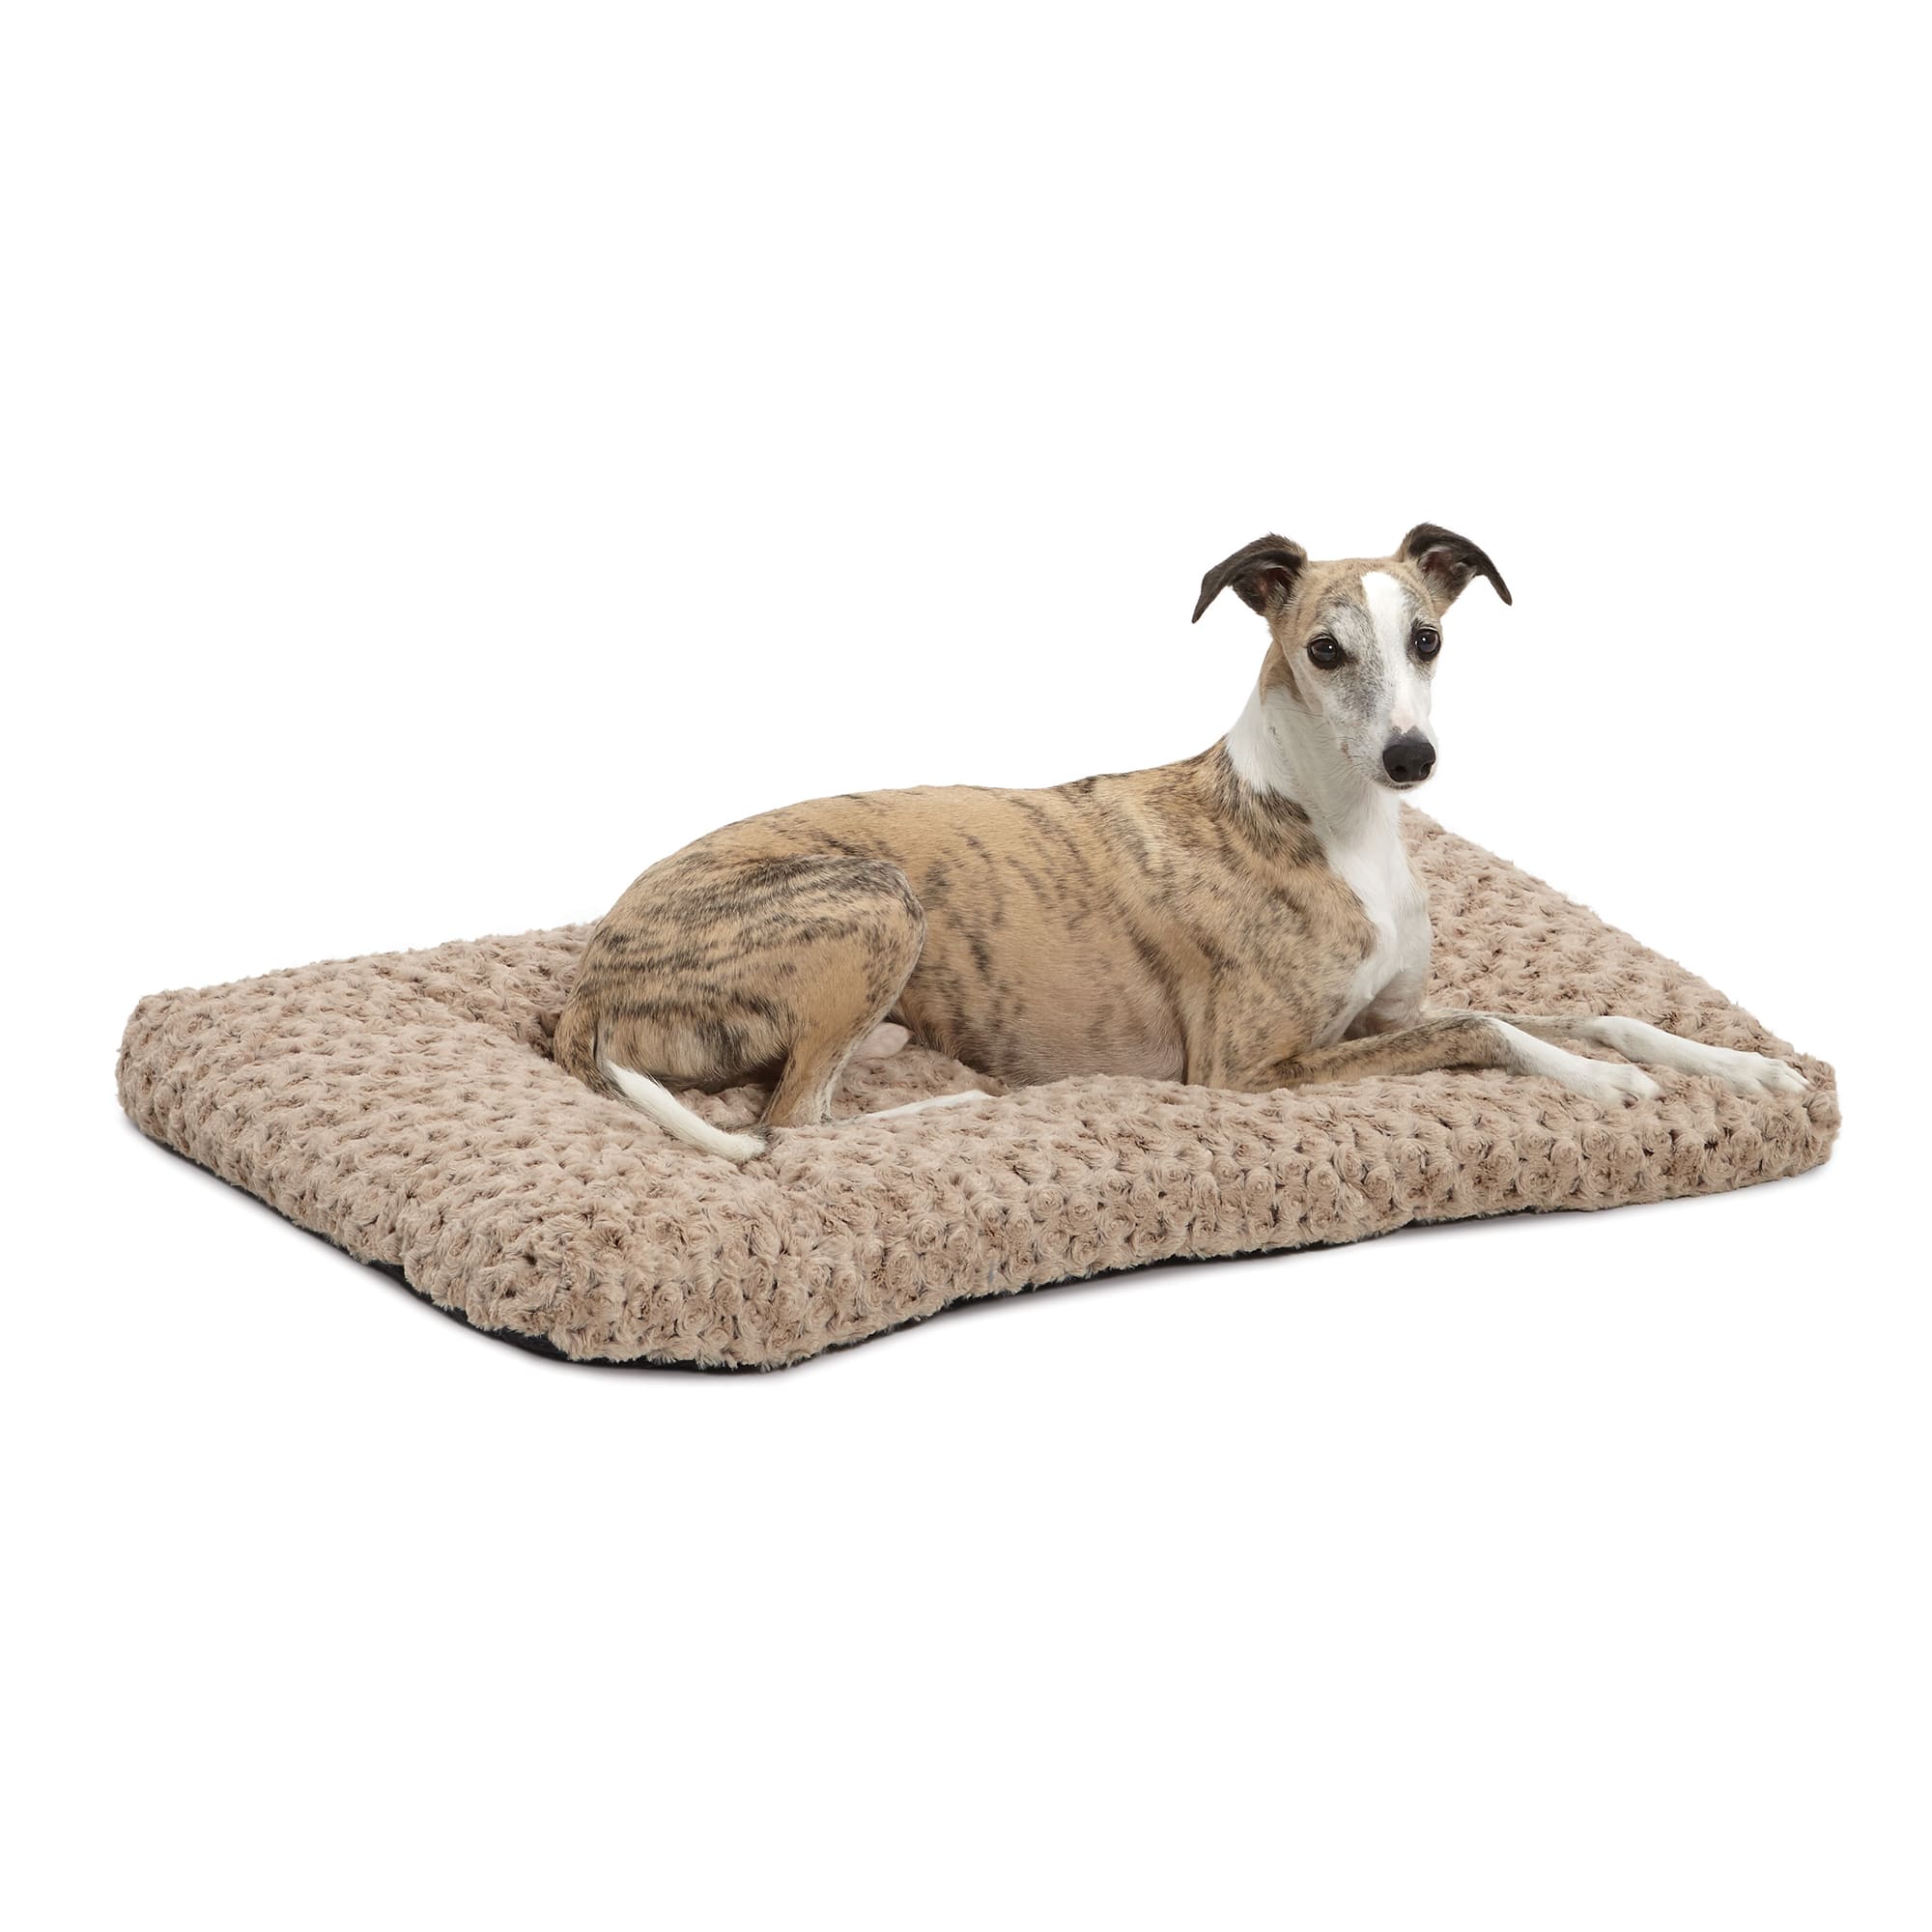 Photos - Dog Bed / Basket Midwest Quiet Time Ombre Taupe Dog Bed, 34" L X 22" W, Large, Brow 